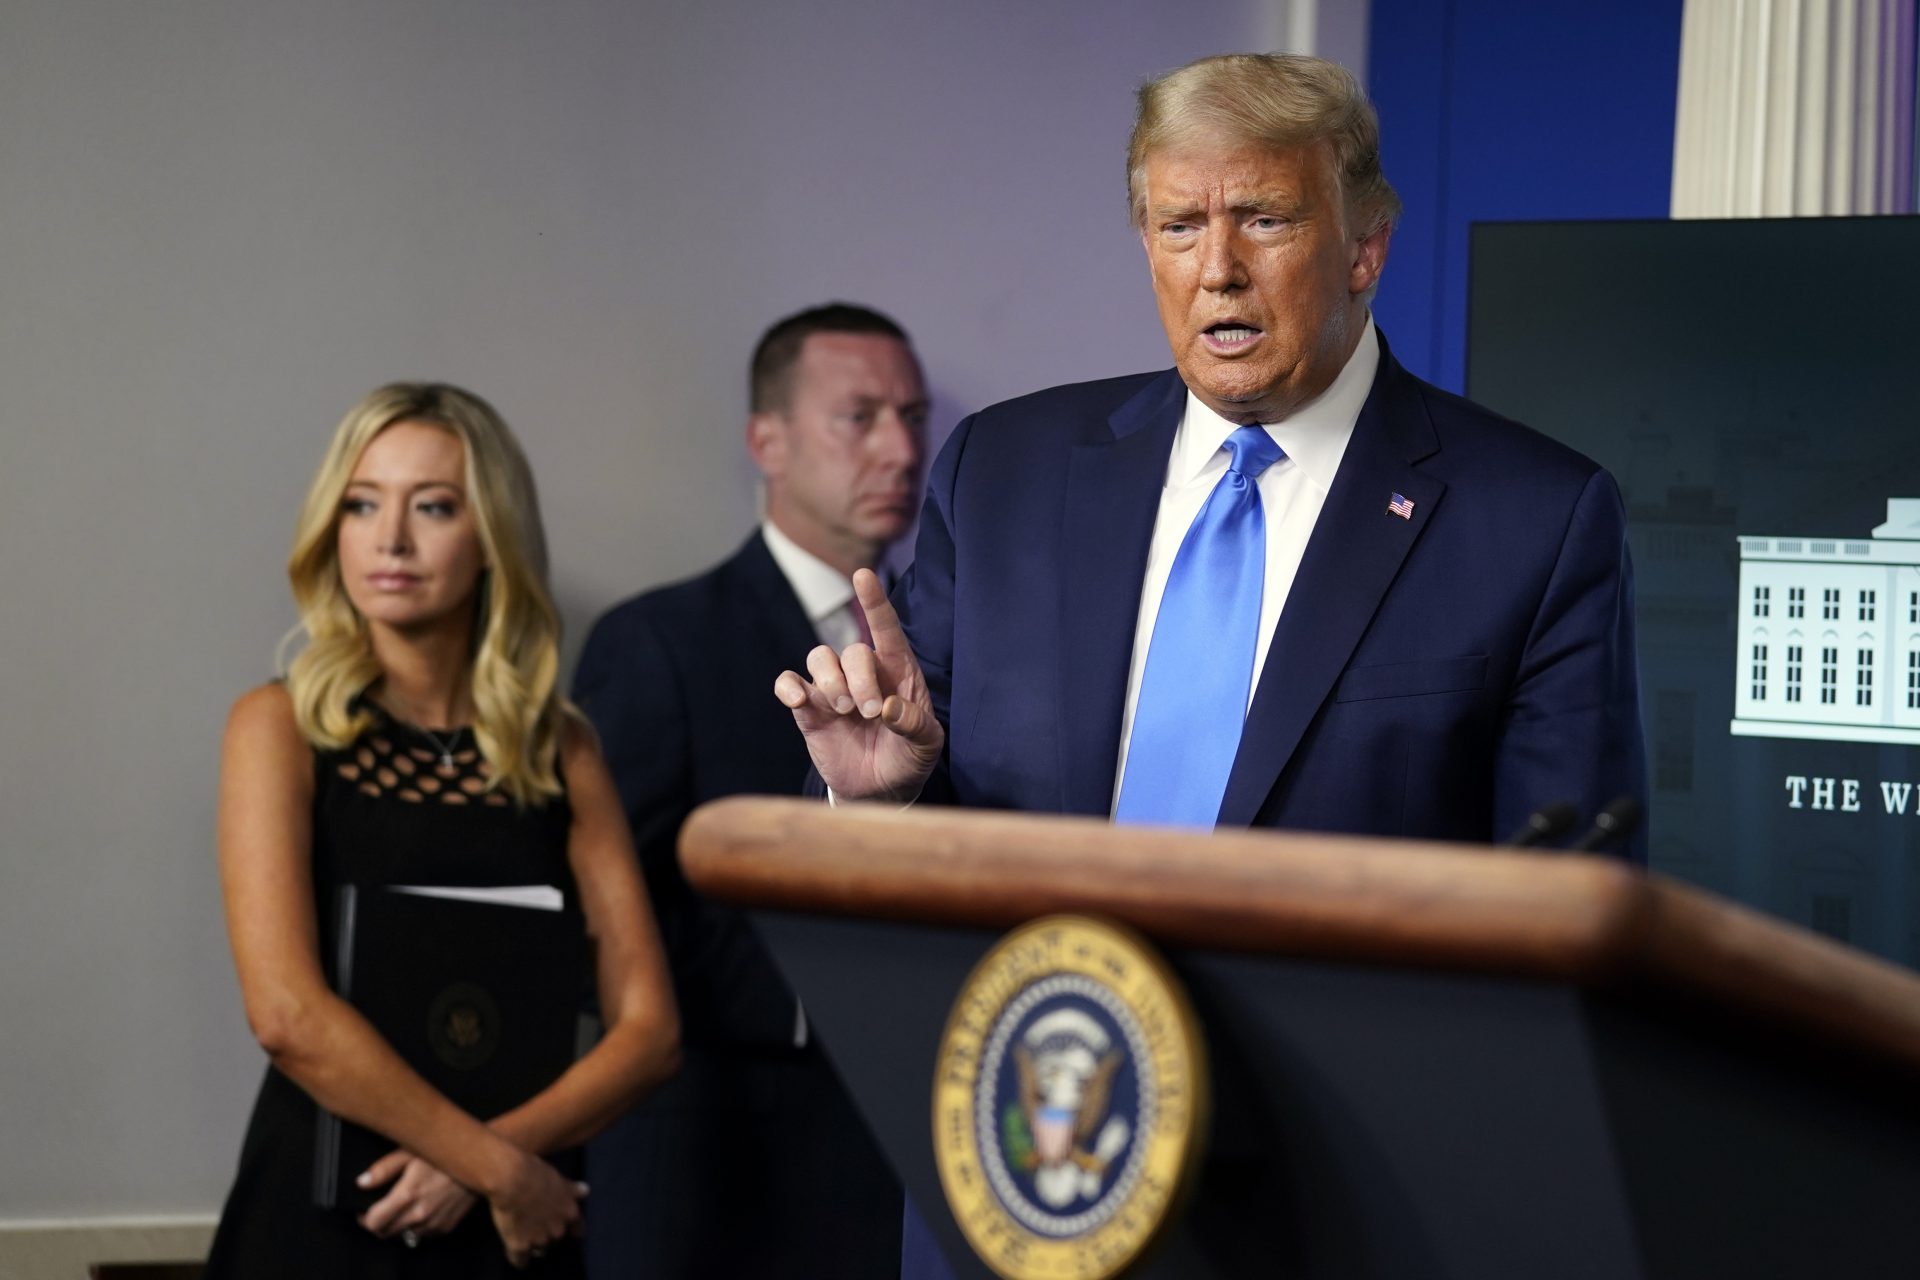 President Donald Trump speaks during a news conference in the James Brady Press Briefing Room of the White House Wednesday, Sept. 23, 2020, in Washington, as White House press secretary Kayleigh McEnany listens.